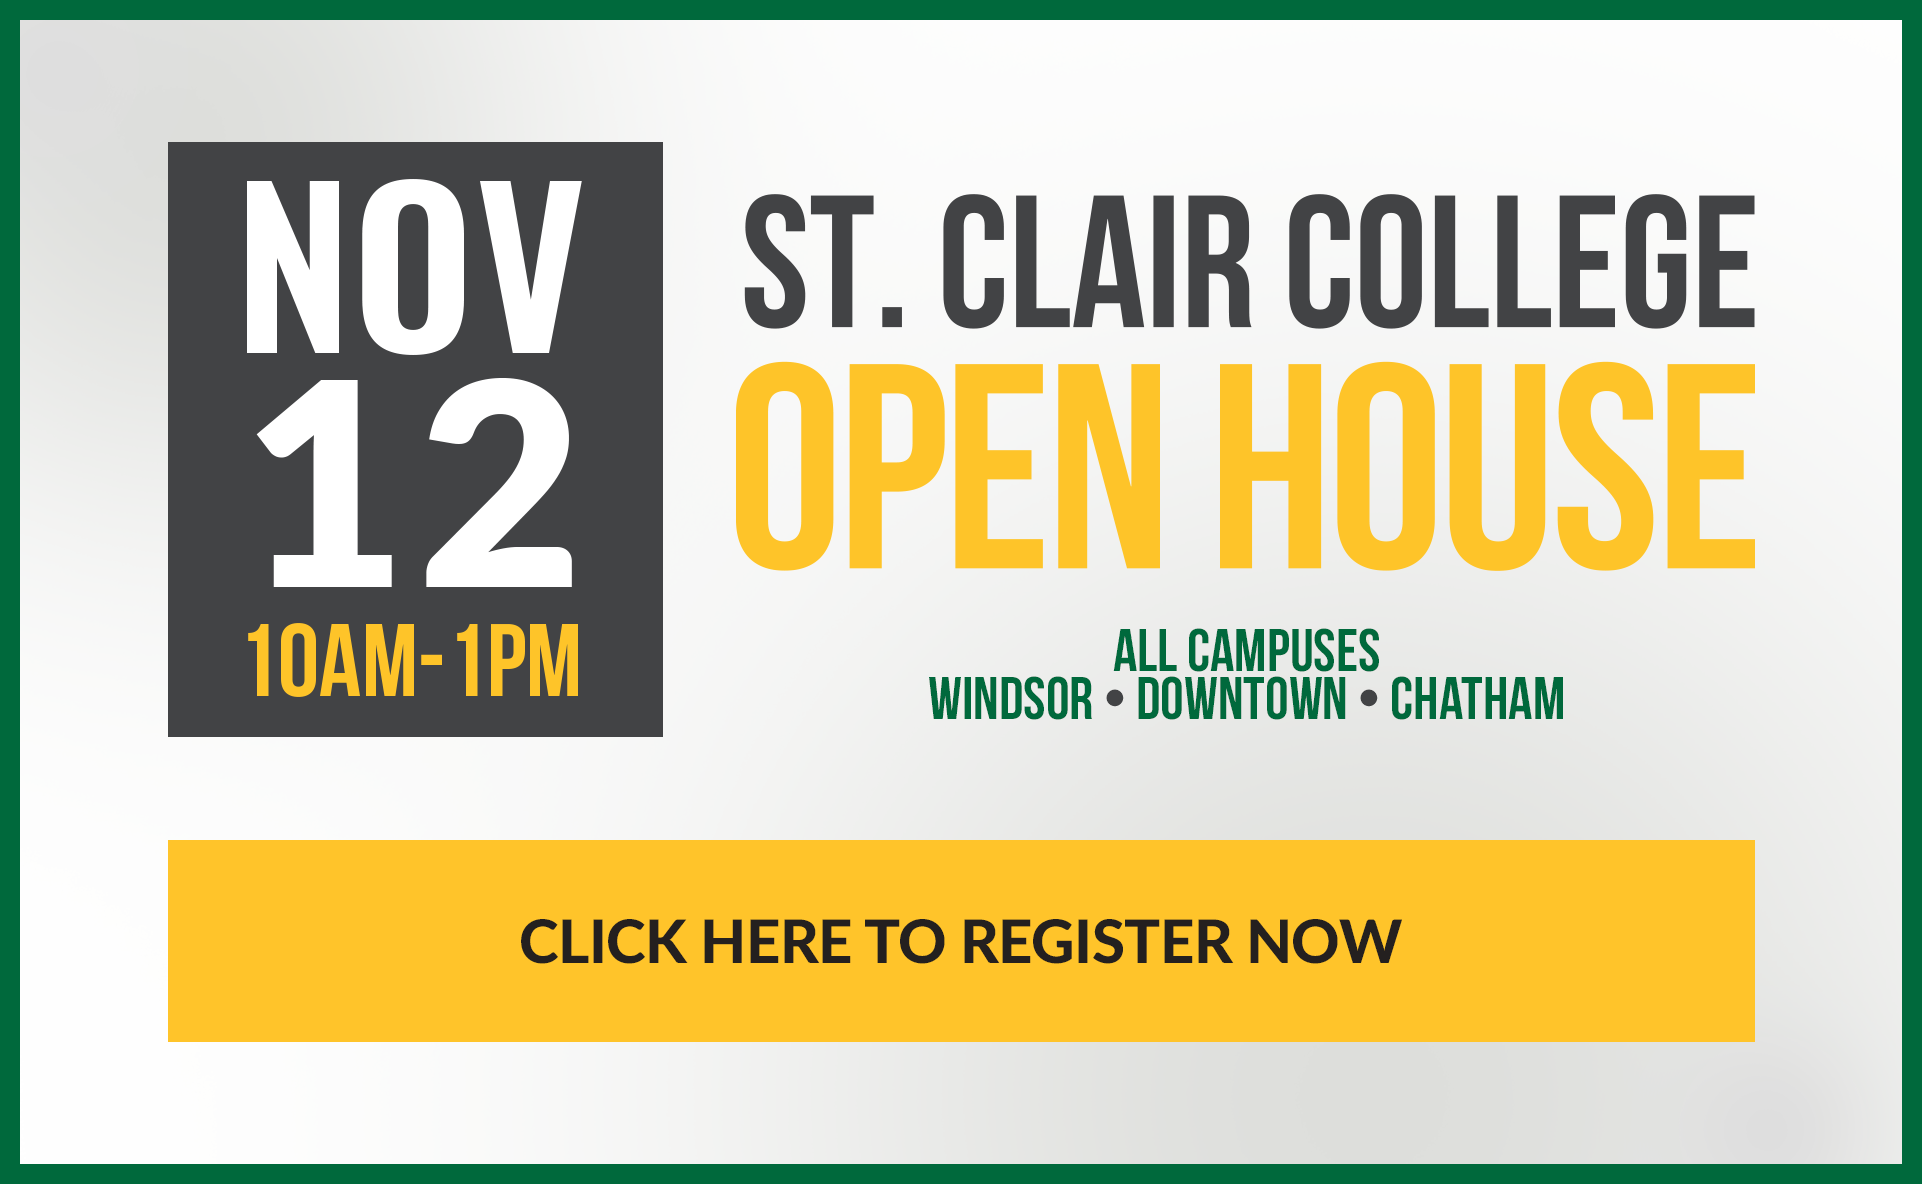 Register for our Open House on Nov. 12, 2022 from 10am to 1pm